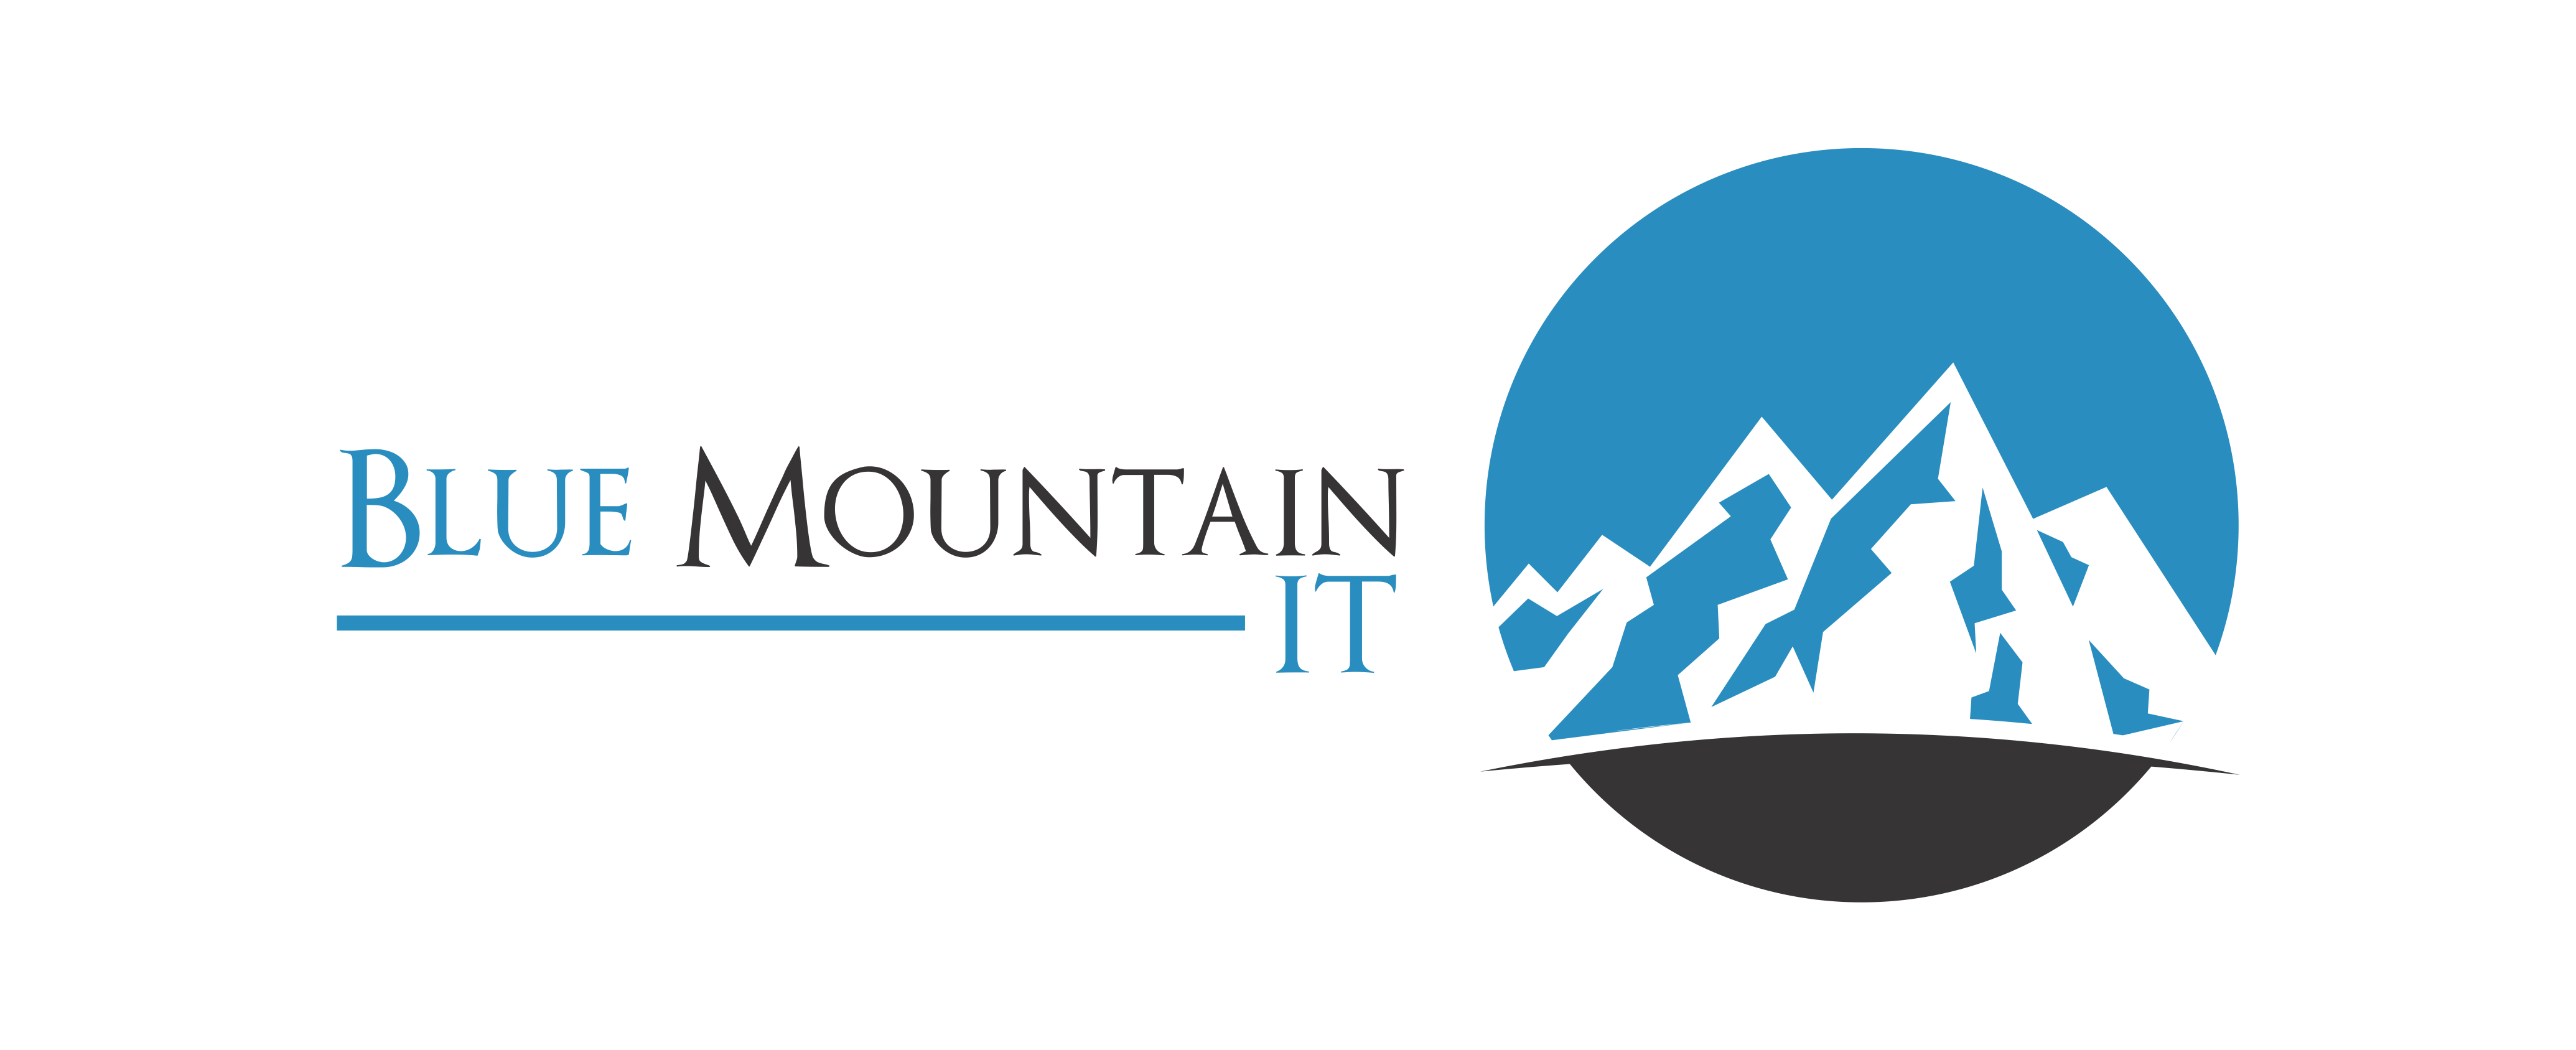 Blue Mountain Logo - Blue Mountain IT. Your IT solutions partner